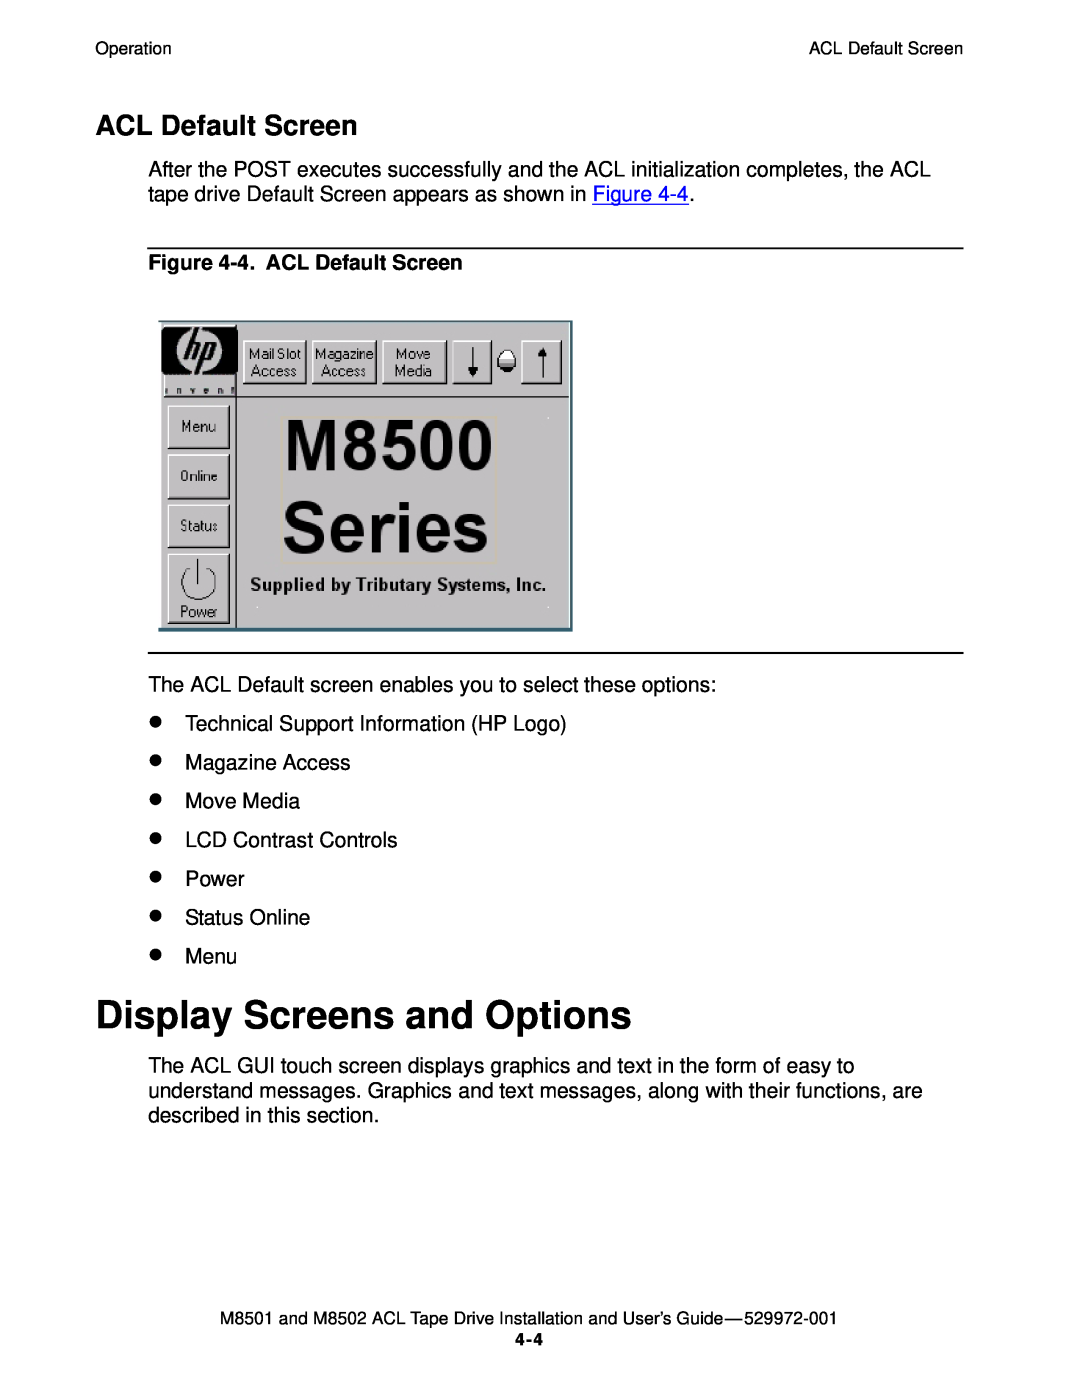 SMC Networks M8501 manual Display Screens and Options, 4. ACL Default Screen 